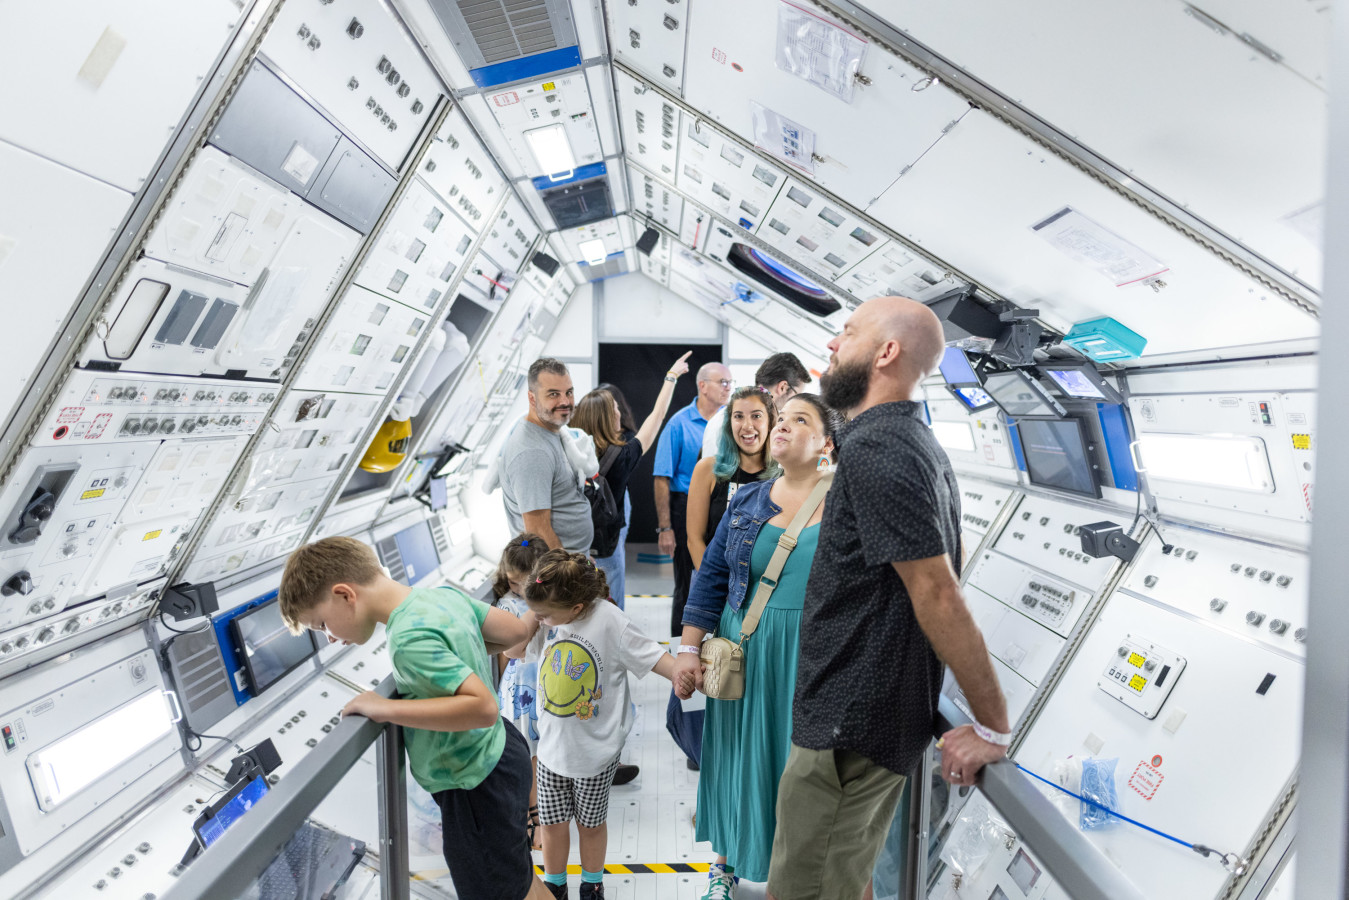 Get a hands-on, climb-aboard experience of what it takes to live and work in space during Frost Science's newest special exhibition, Journey to Space!